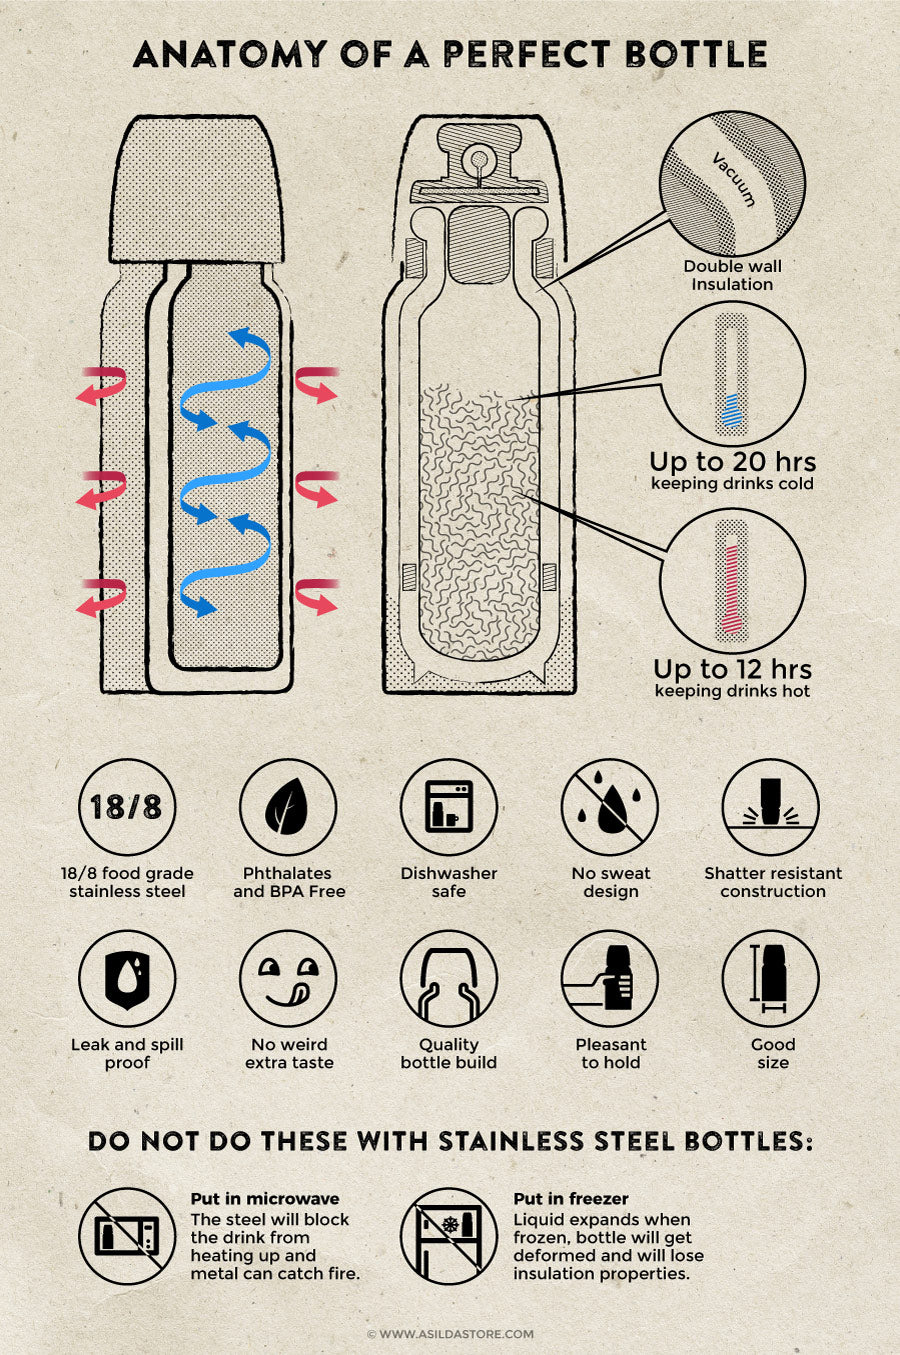 The anatomy of a perfect insulated water bottle